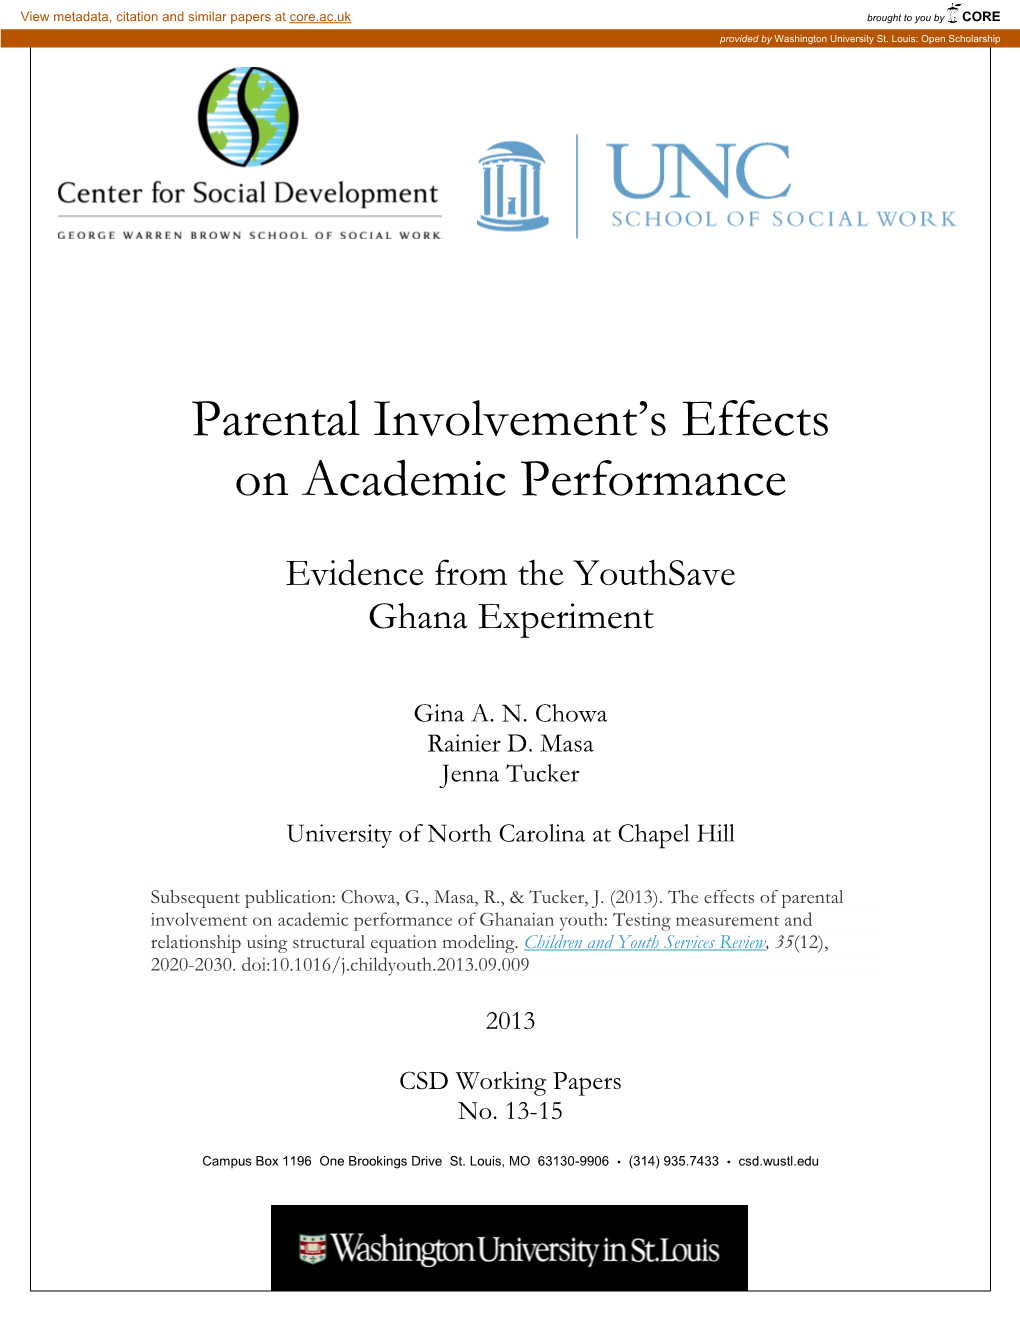 Parental Involvement's Effects on Academic Performance